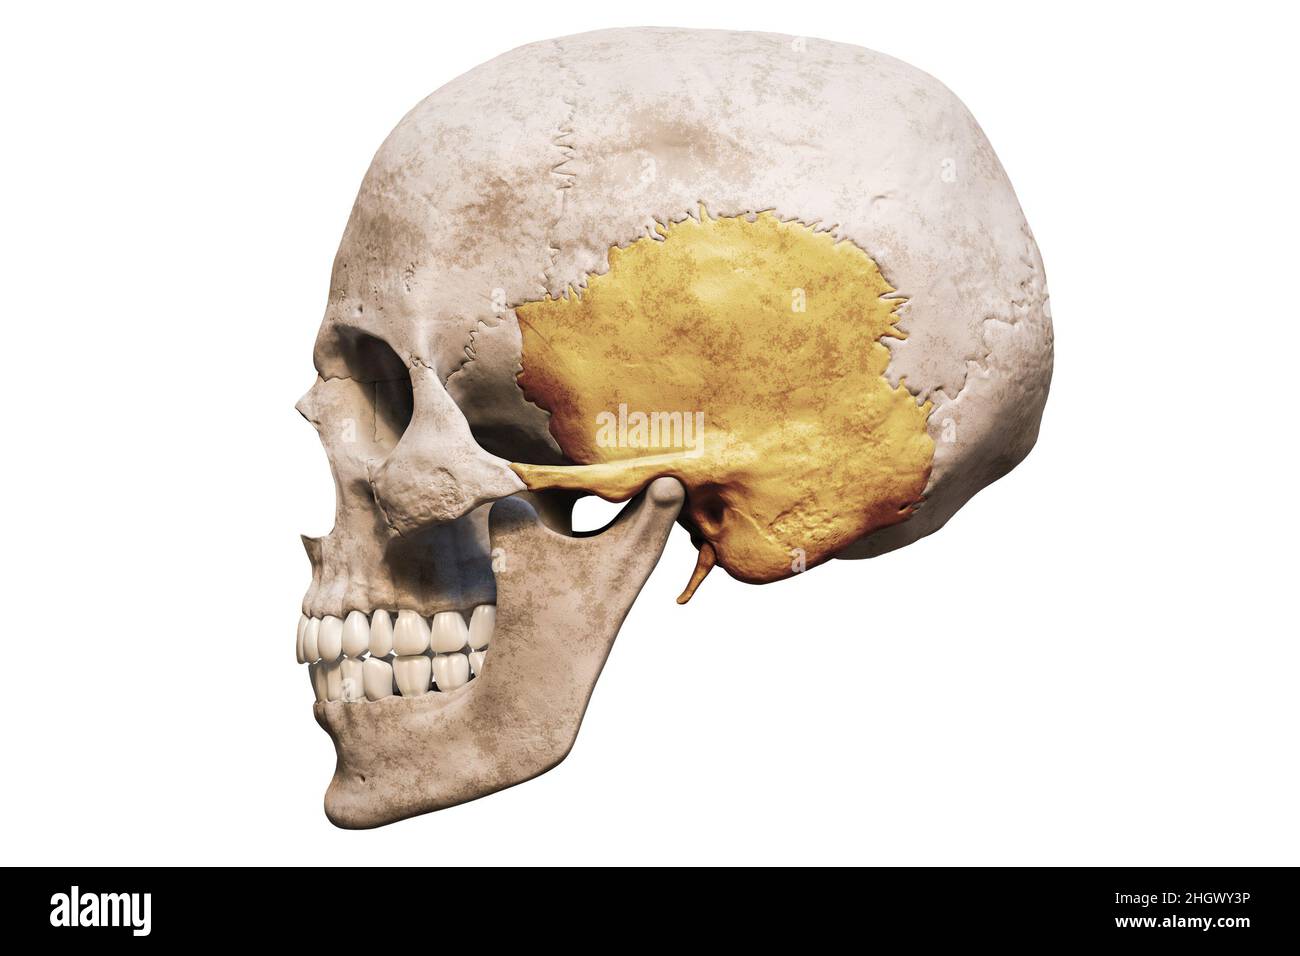 Anatomically accurate human male skull with colorized temporal bone lateral or profile view isolated on white background with copy space 3D rendering Stock Photo